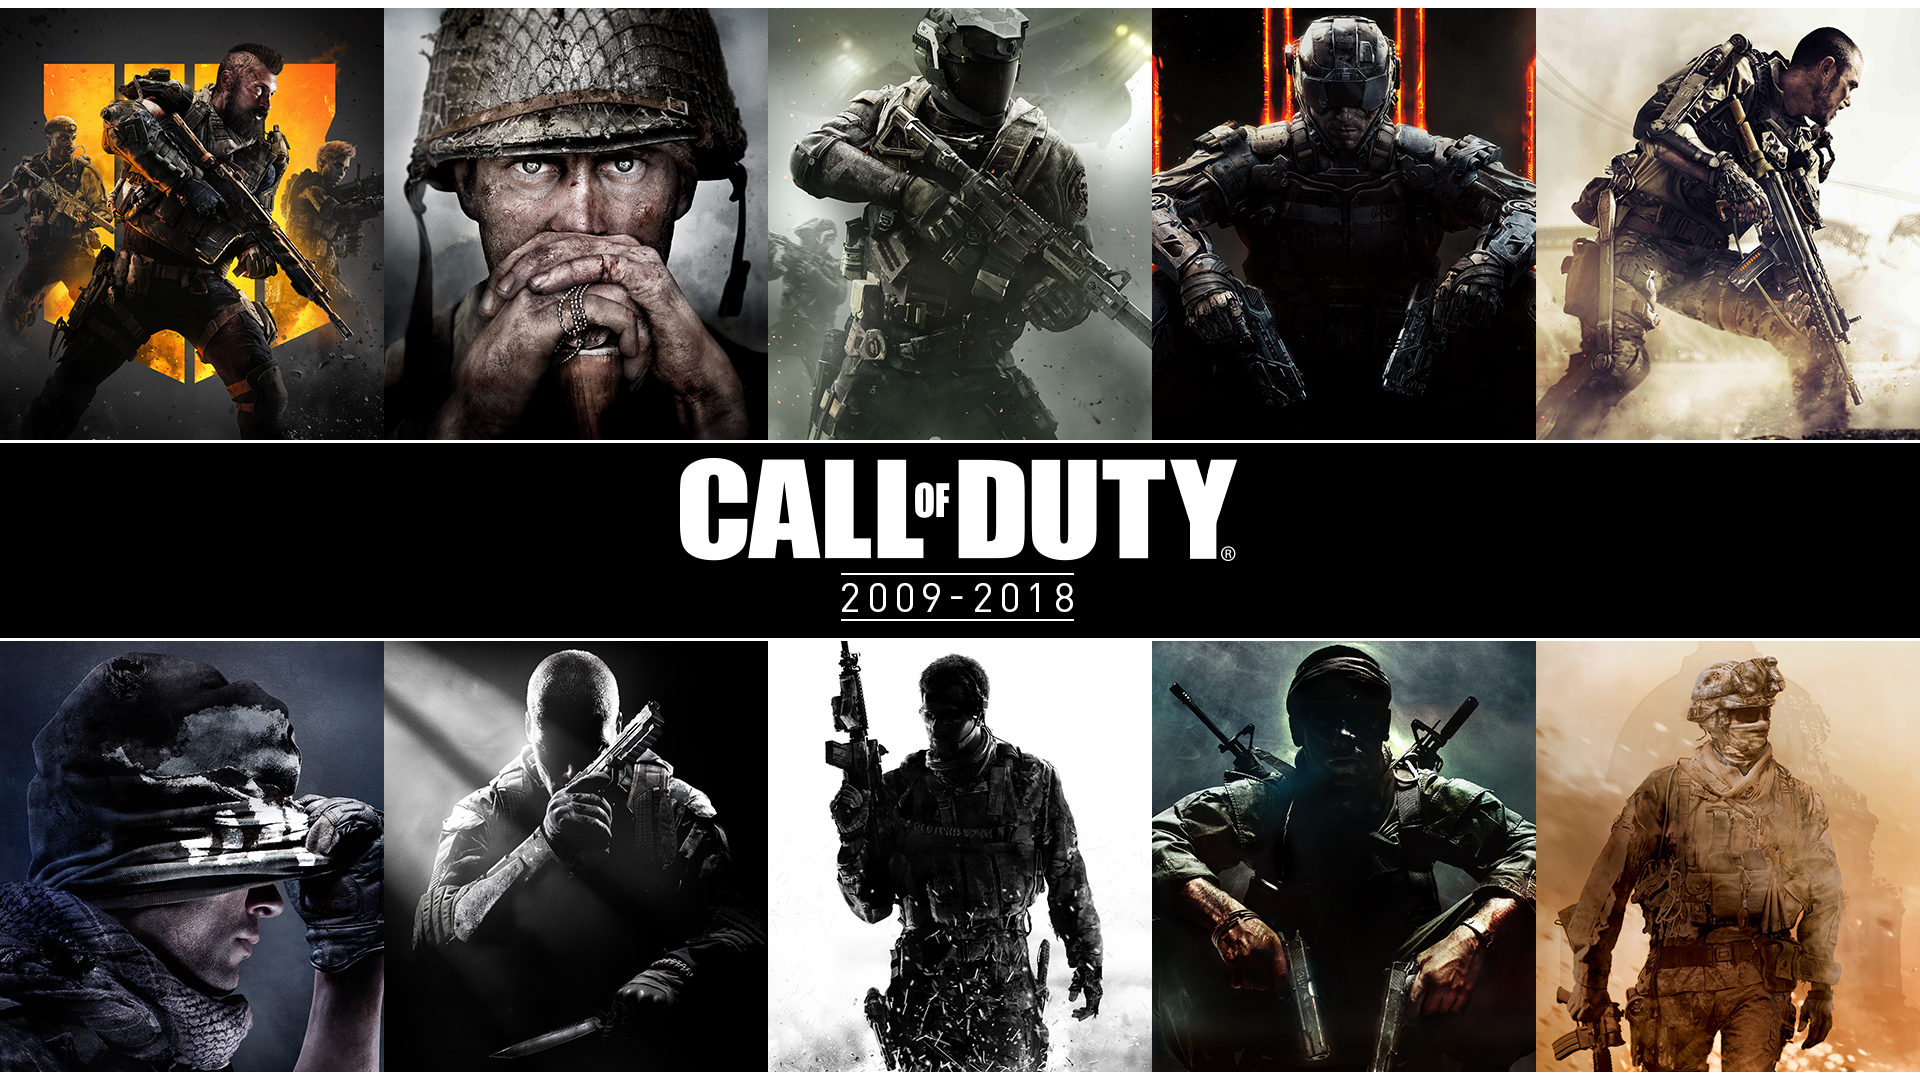 10 games like Call of Duty that you should play now